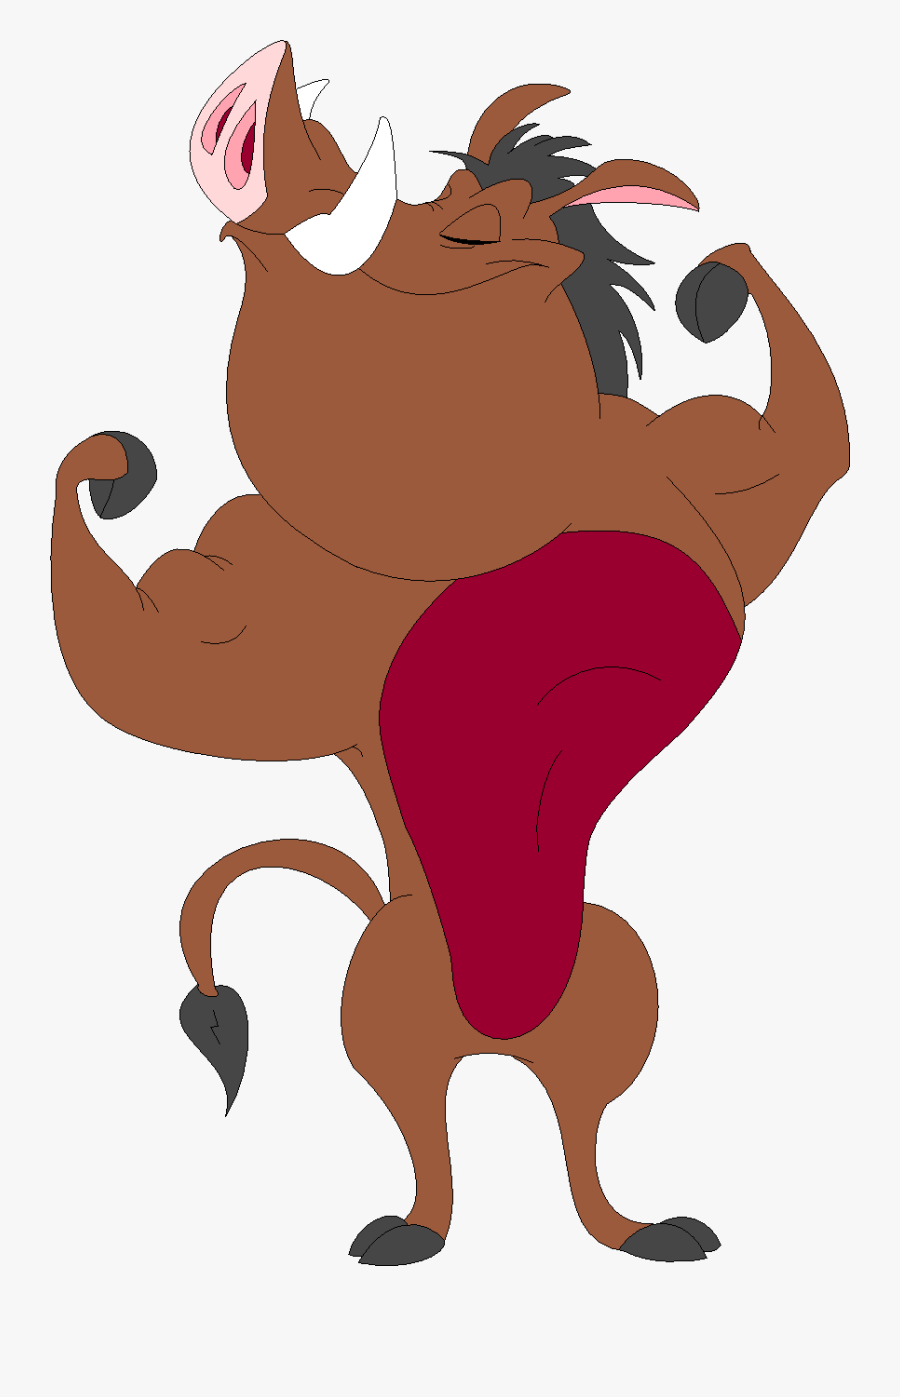 Pumbaa Smith Once Again Shows Off His Muscles - Timon And Pumbaa Fanart, Transparent Clipart